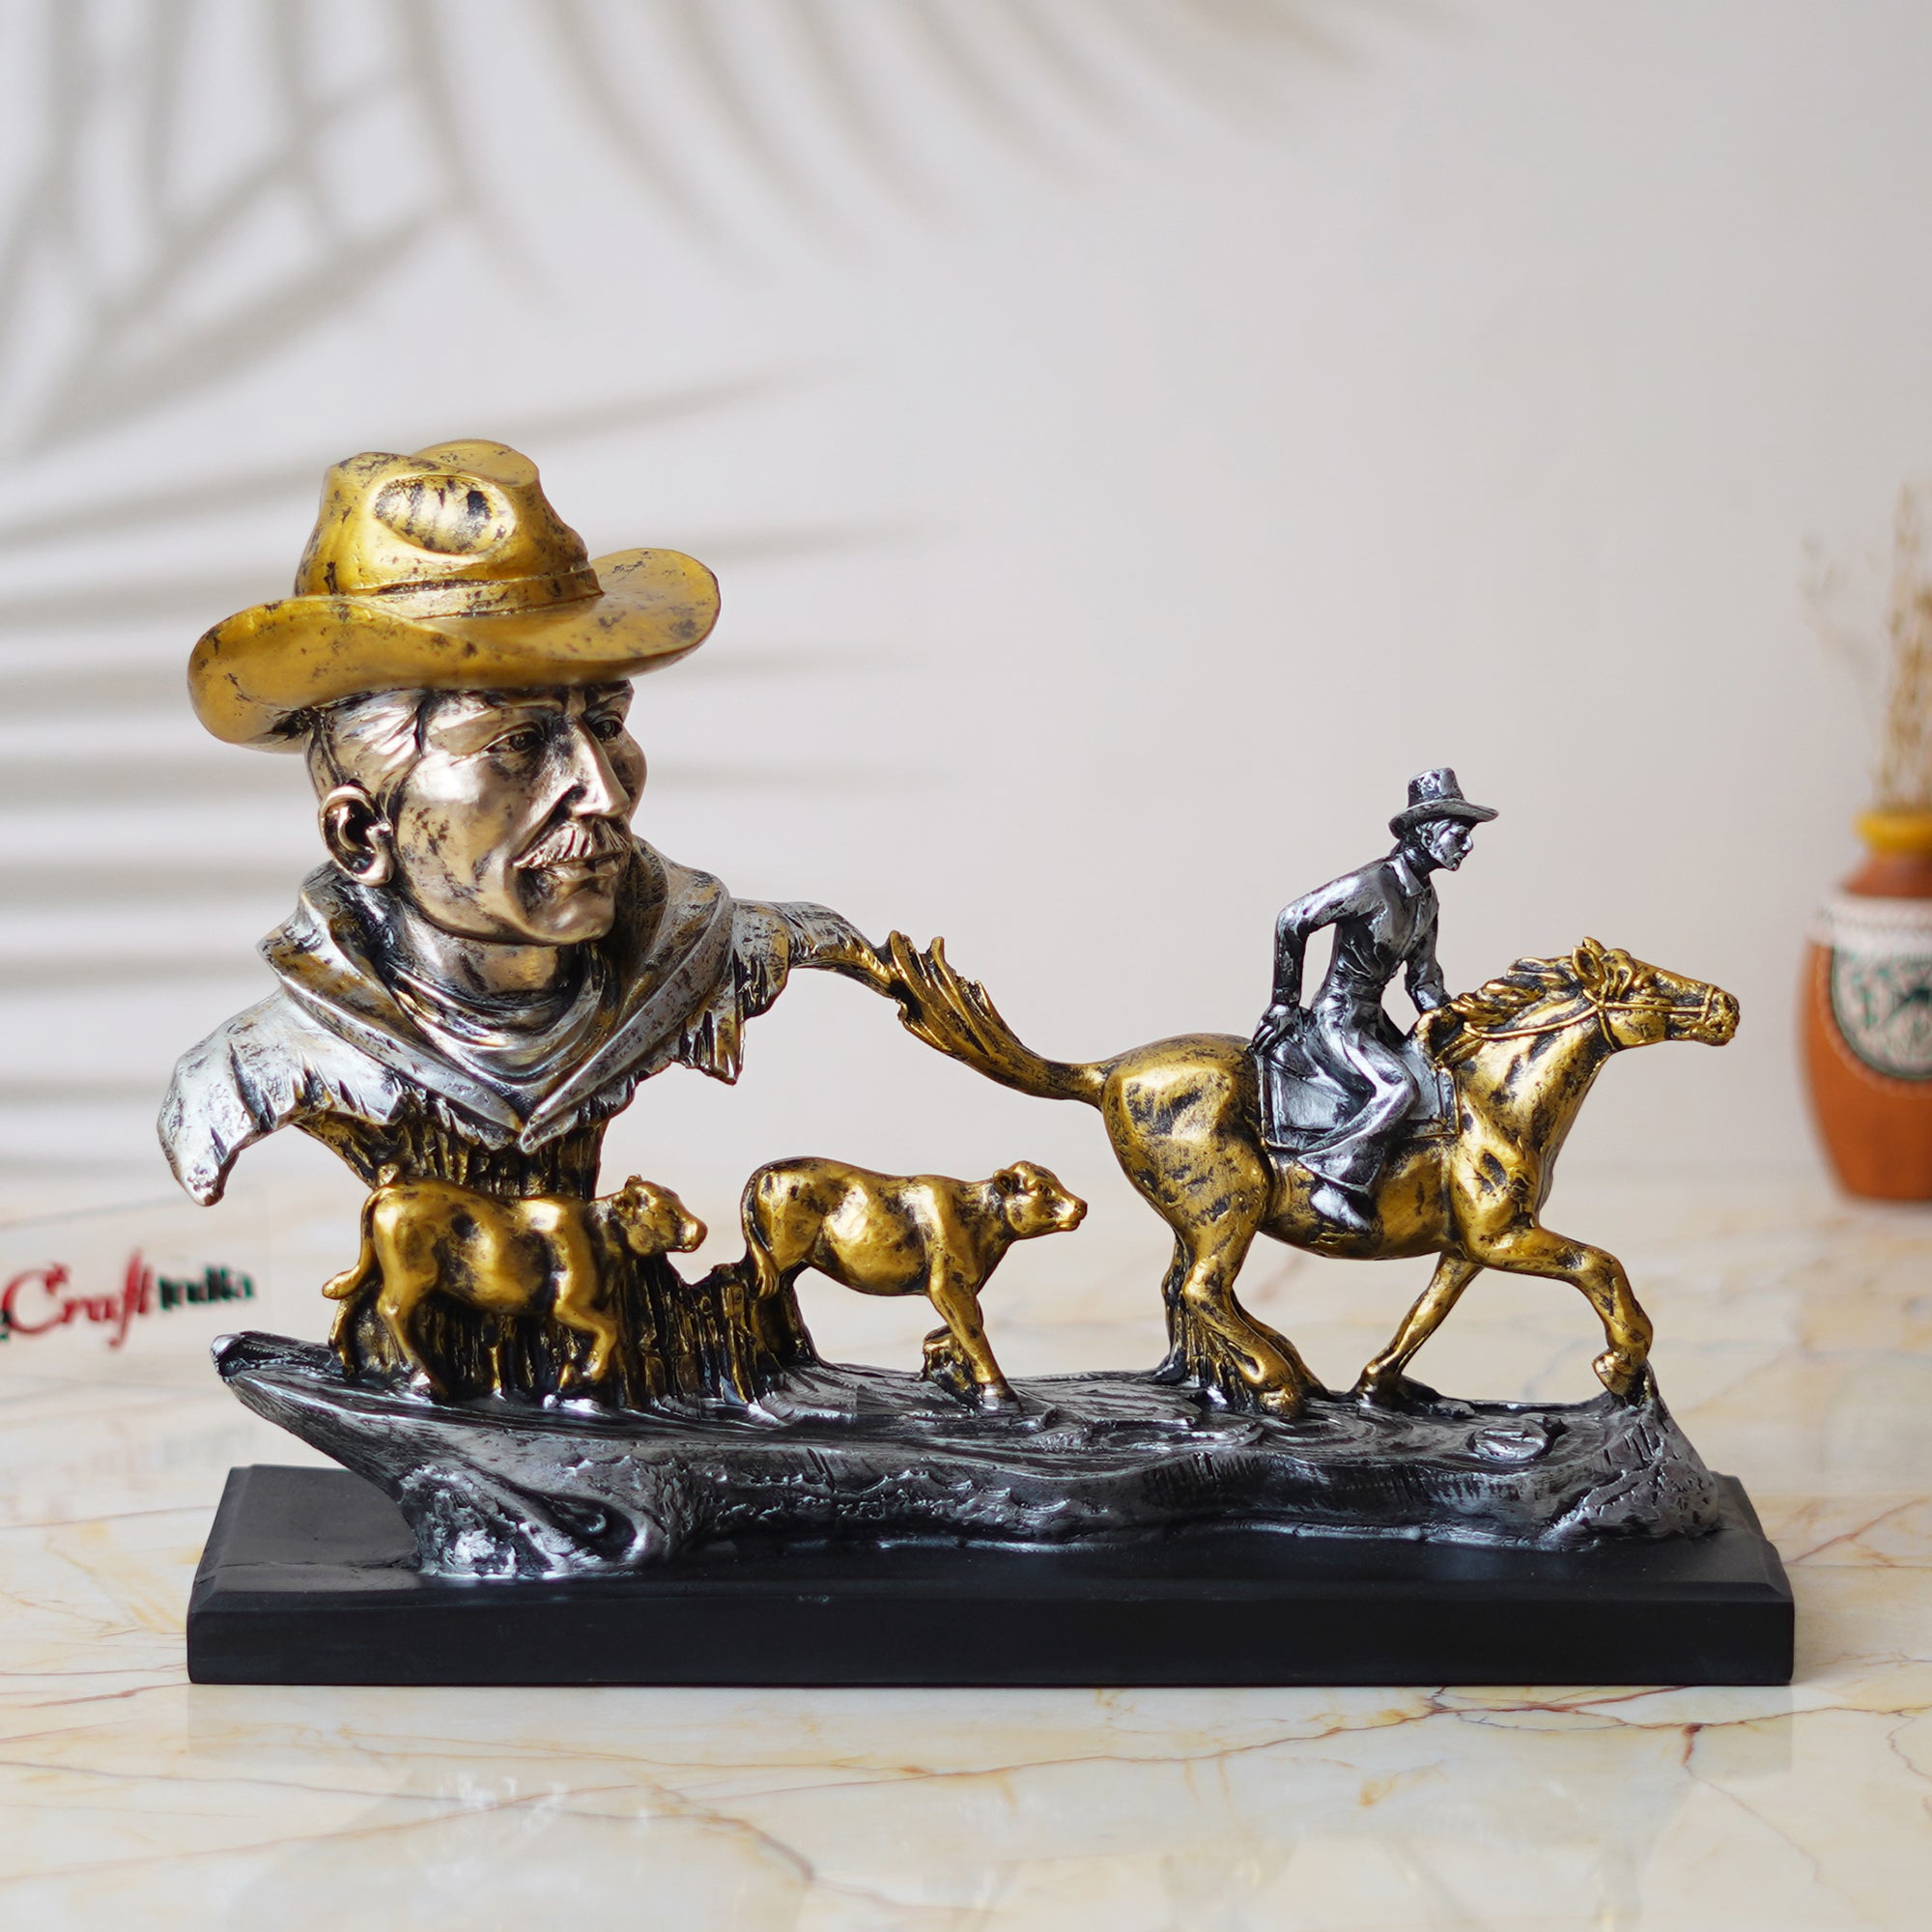 Antique Cowboys Face with Boy Sitting on Running Horse & Cow Statues Decorative Showpiece